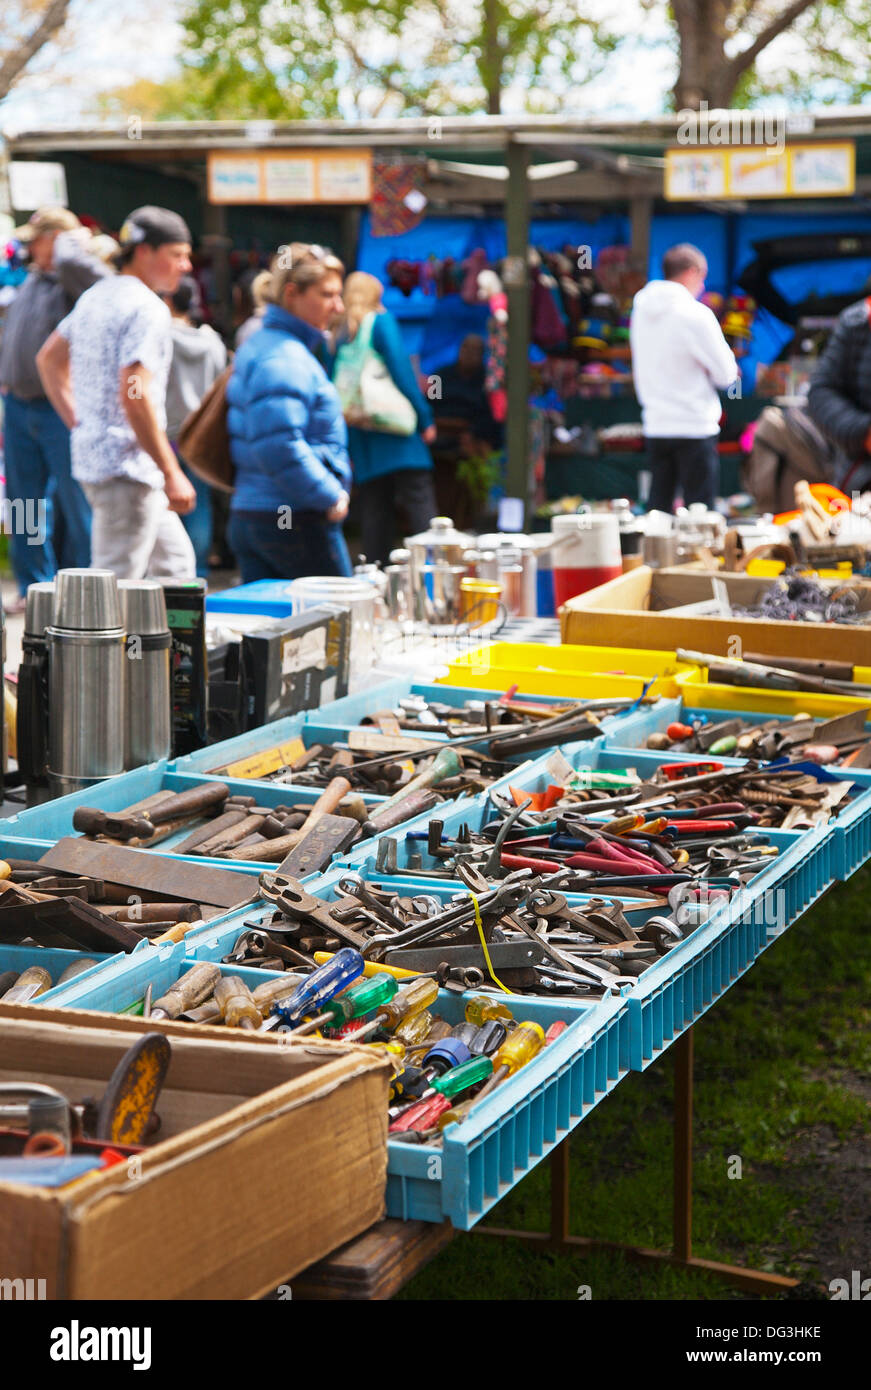 People wandering around stalls selling various used secondhand tools, household equipment and bric-a-brac at an outdoor market. Stock Photo